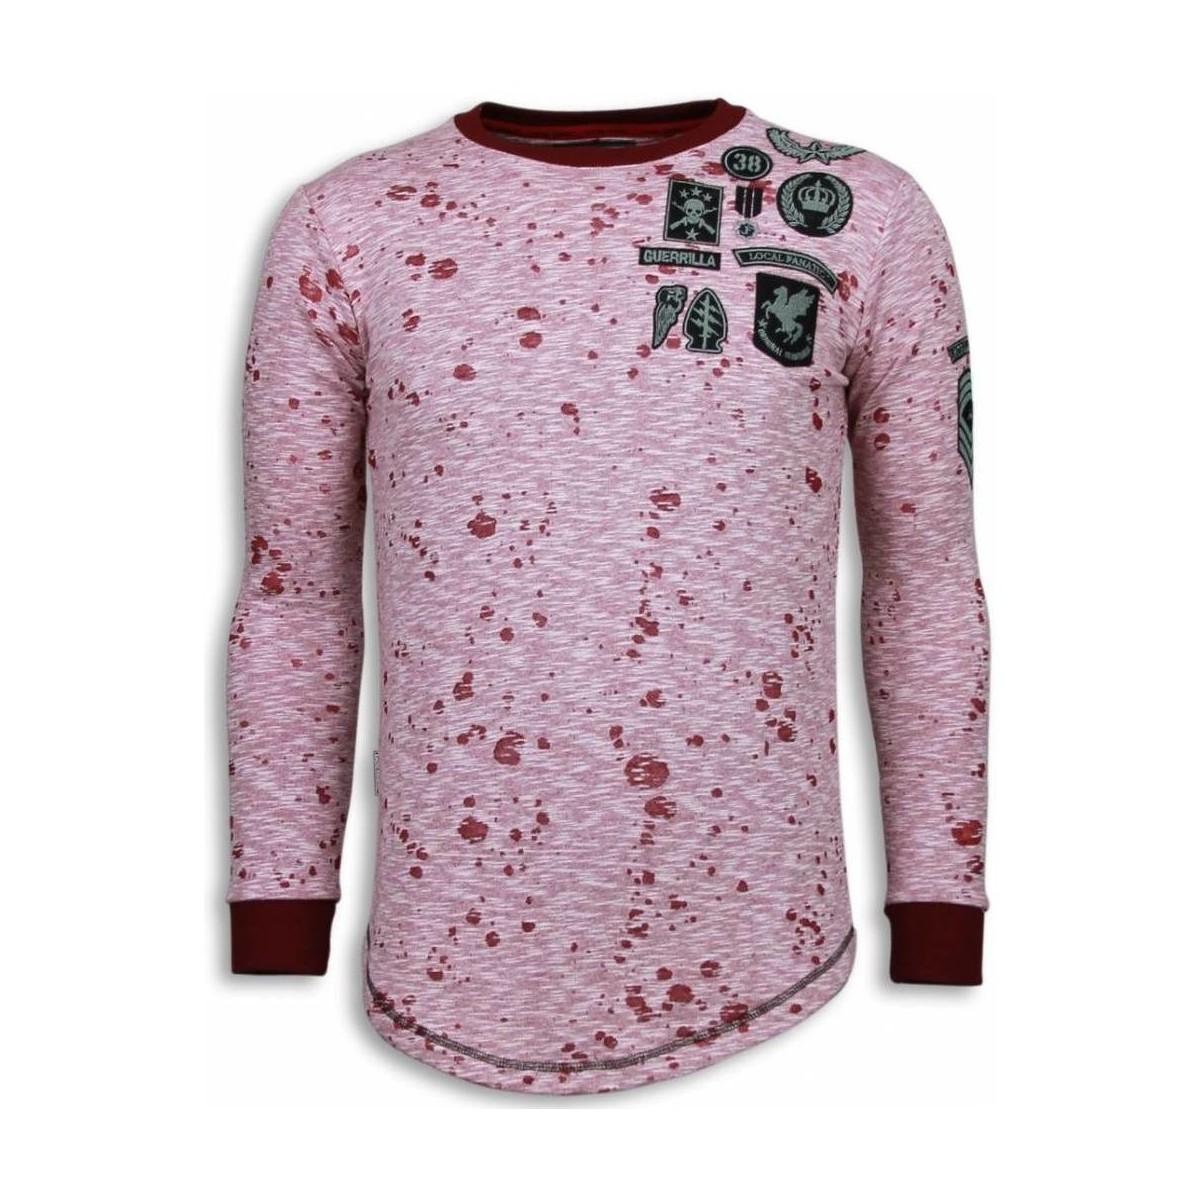 Textiel Heren Sweaters / Sweatshirts Local Fanatic Longfit Embroidery Patches Roze